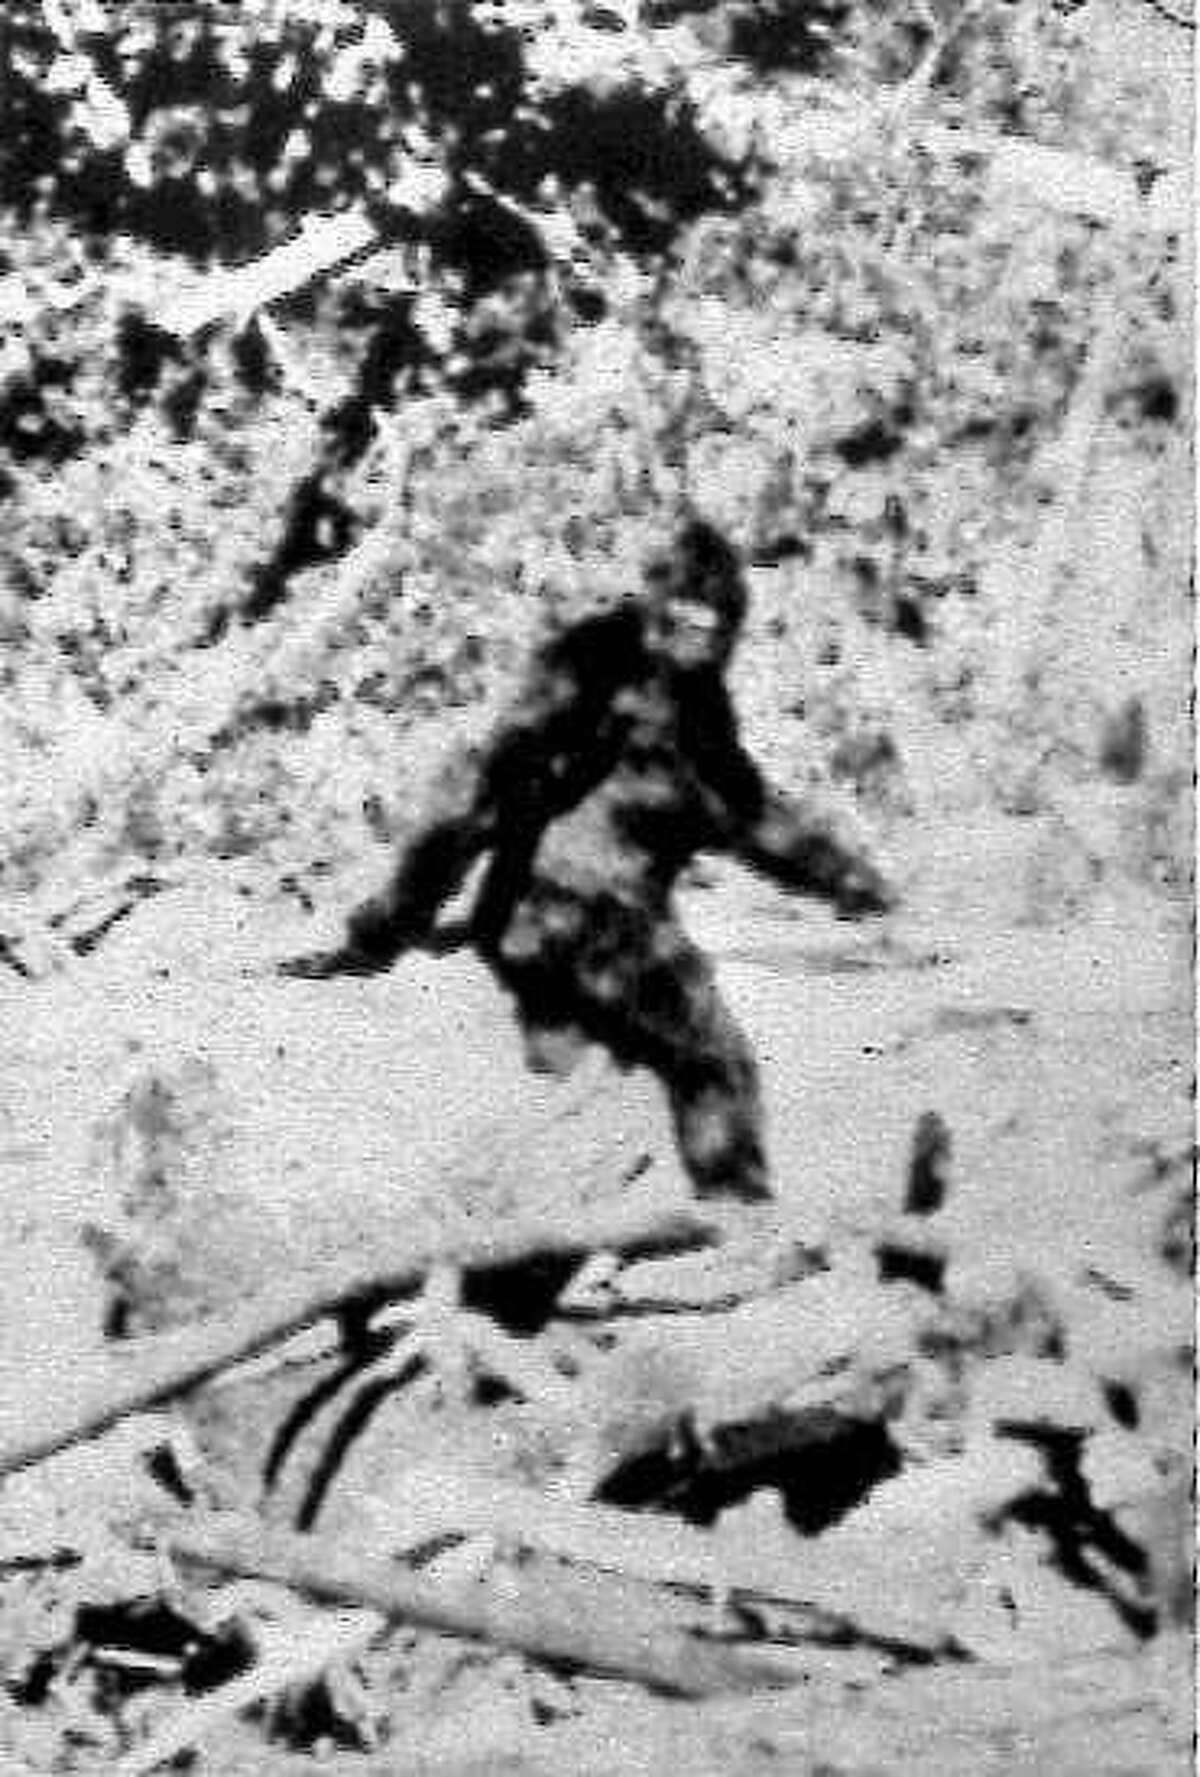 Roger Patterson and Bob Gimlin made this image as part of a 16mm film Oct. 20, 1967, purportedly showing a female Bigfoot, during a horseback search in northern California for Sasquatch or 'Bigfoot'.